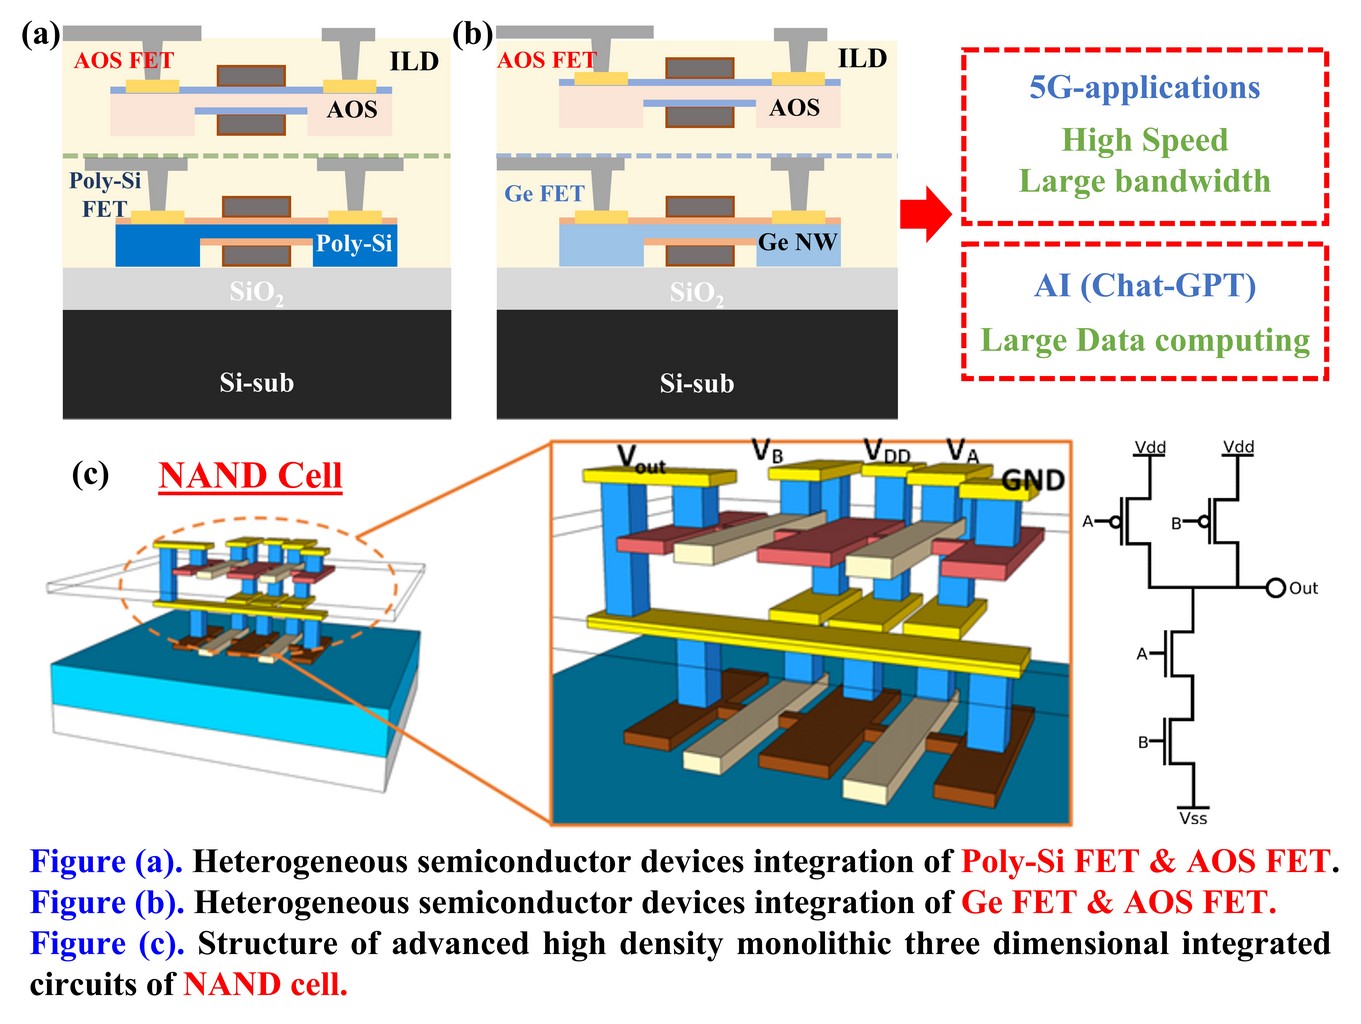 Novel Monolithic 3D Heterogeneous Semiconductor Device Integration for Ultra-High-Density (20M NAND-Gate/mm^2) Logic Gate Circuits